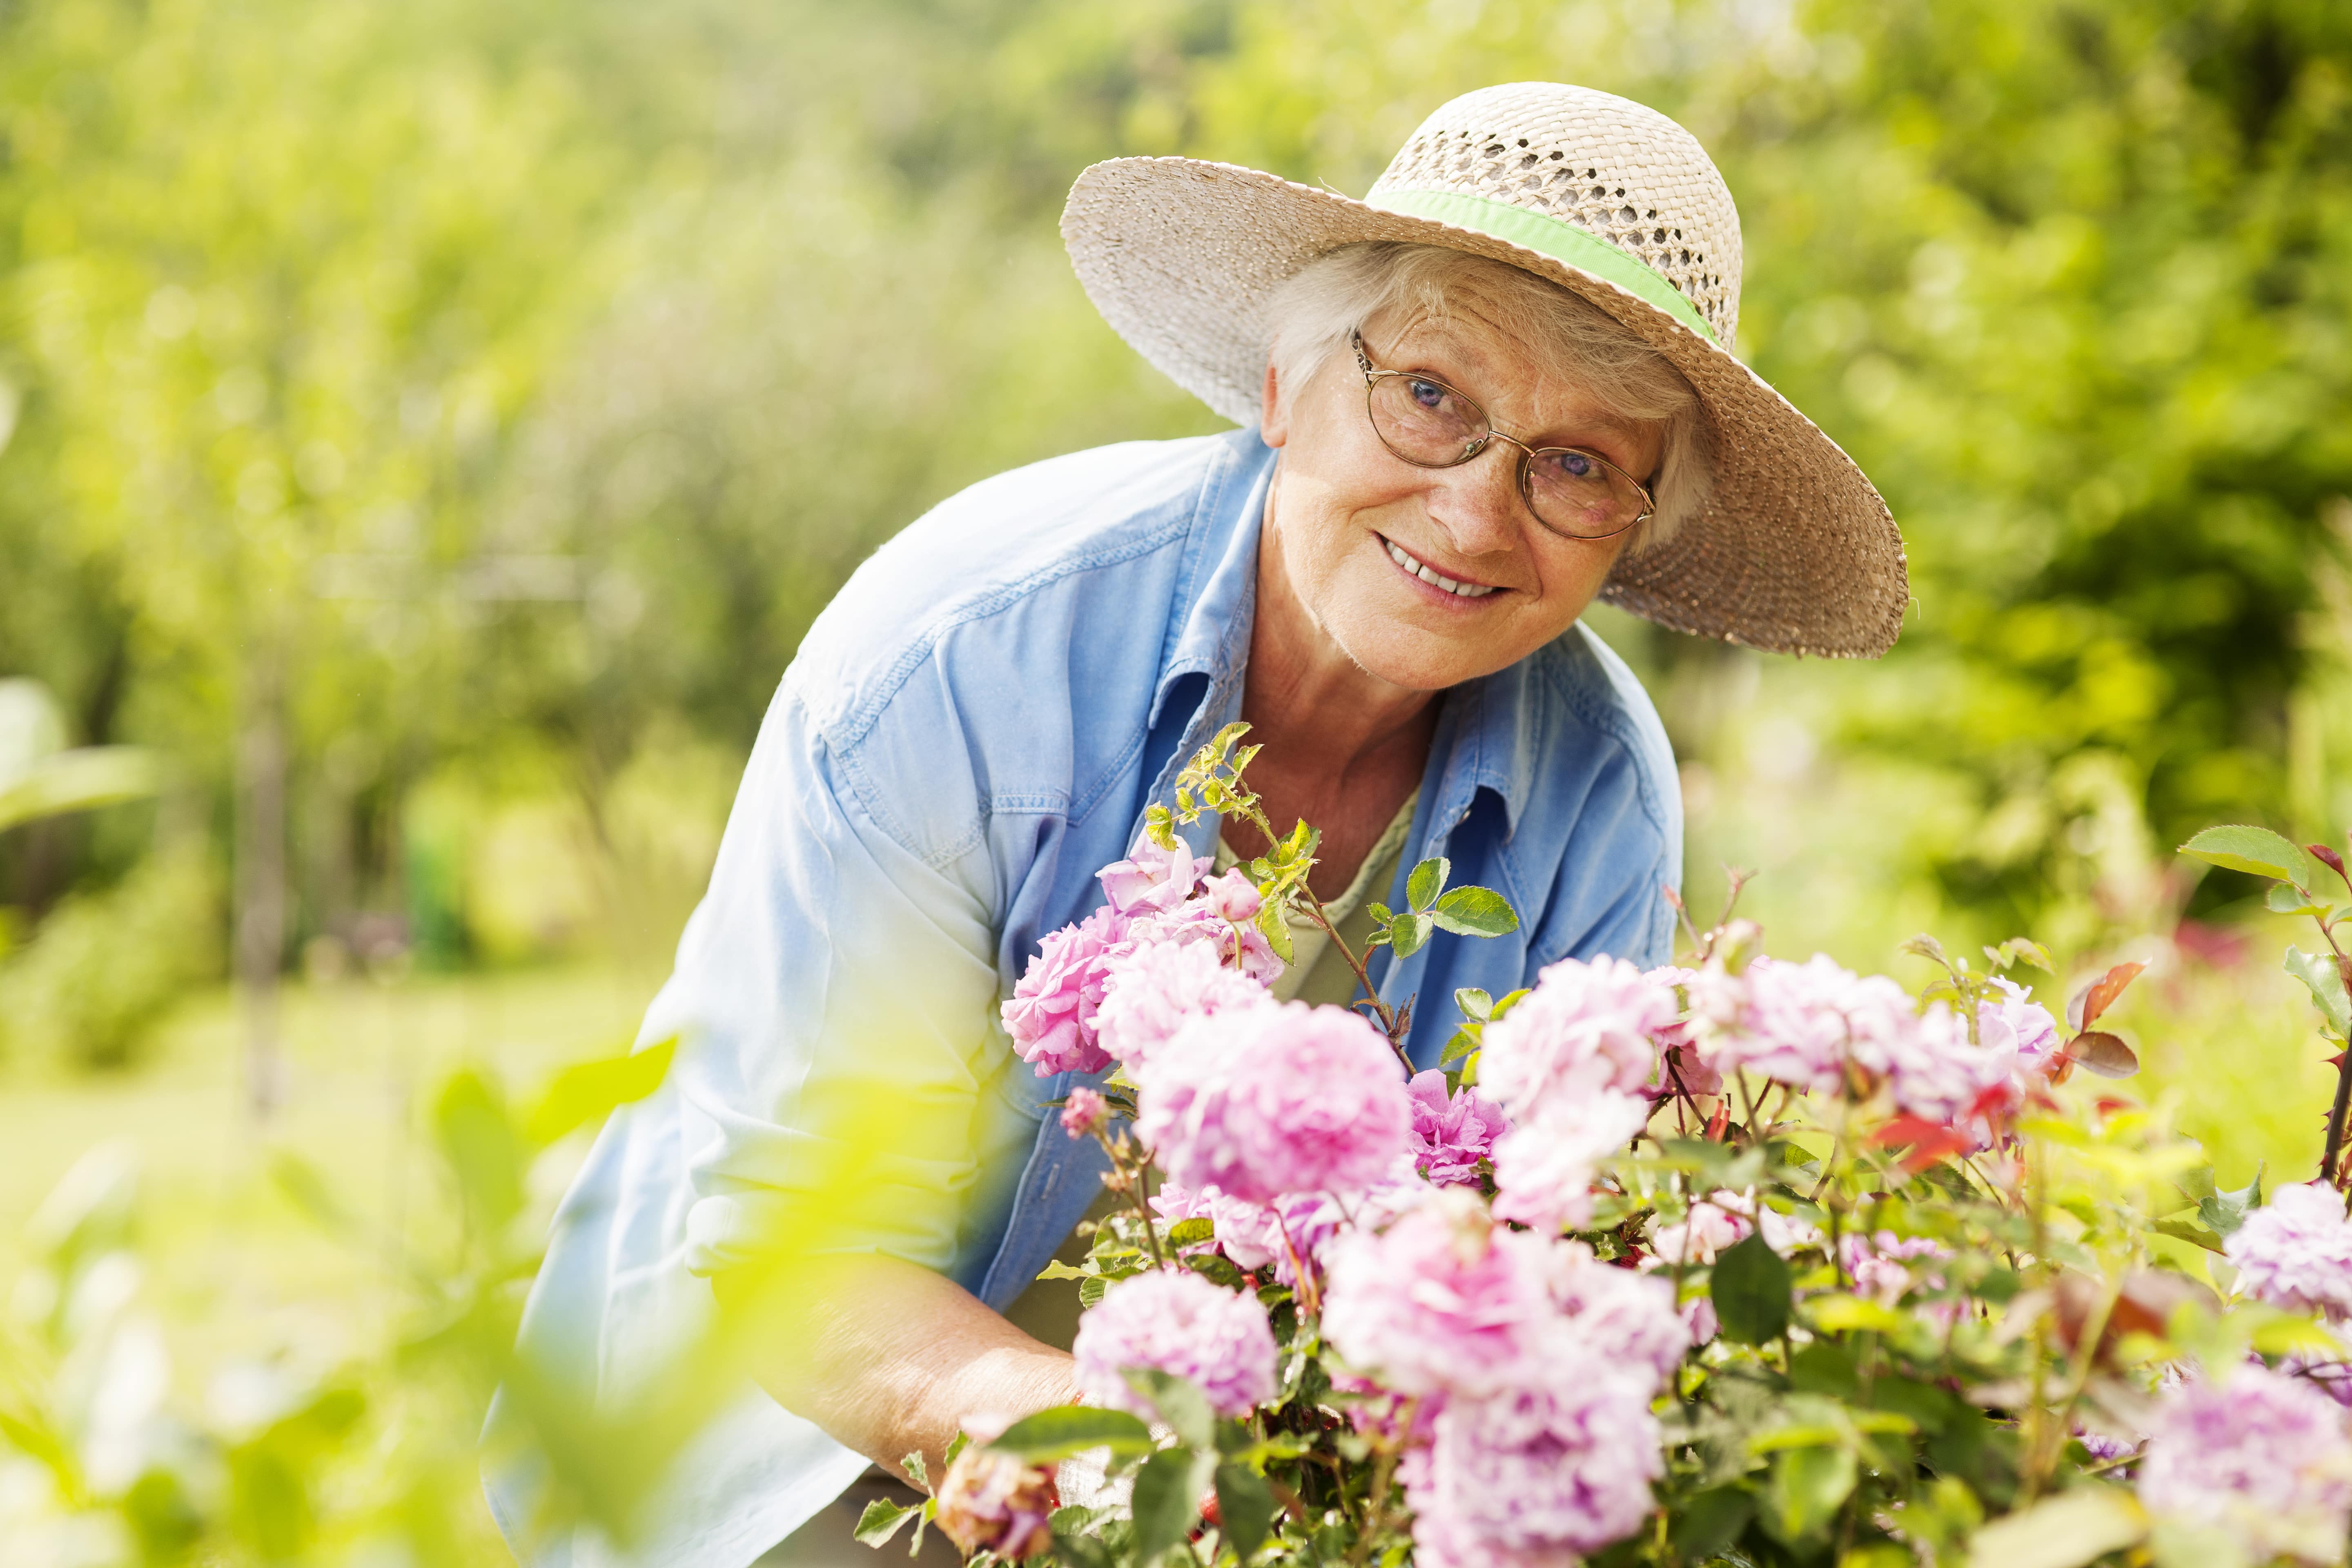 An older adult enjoying time in the garden